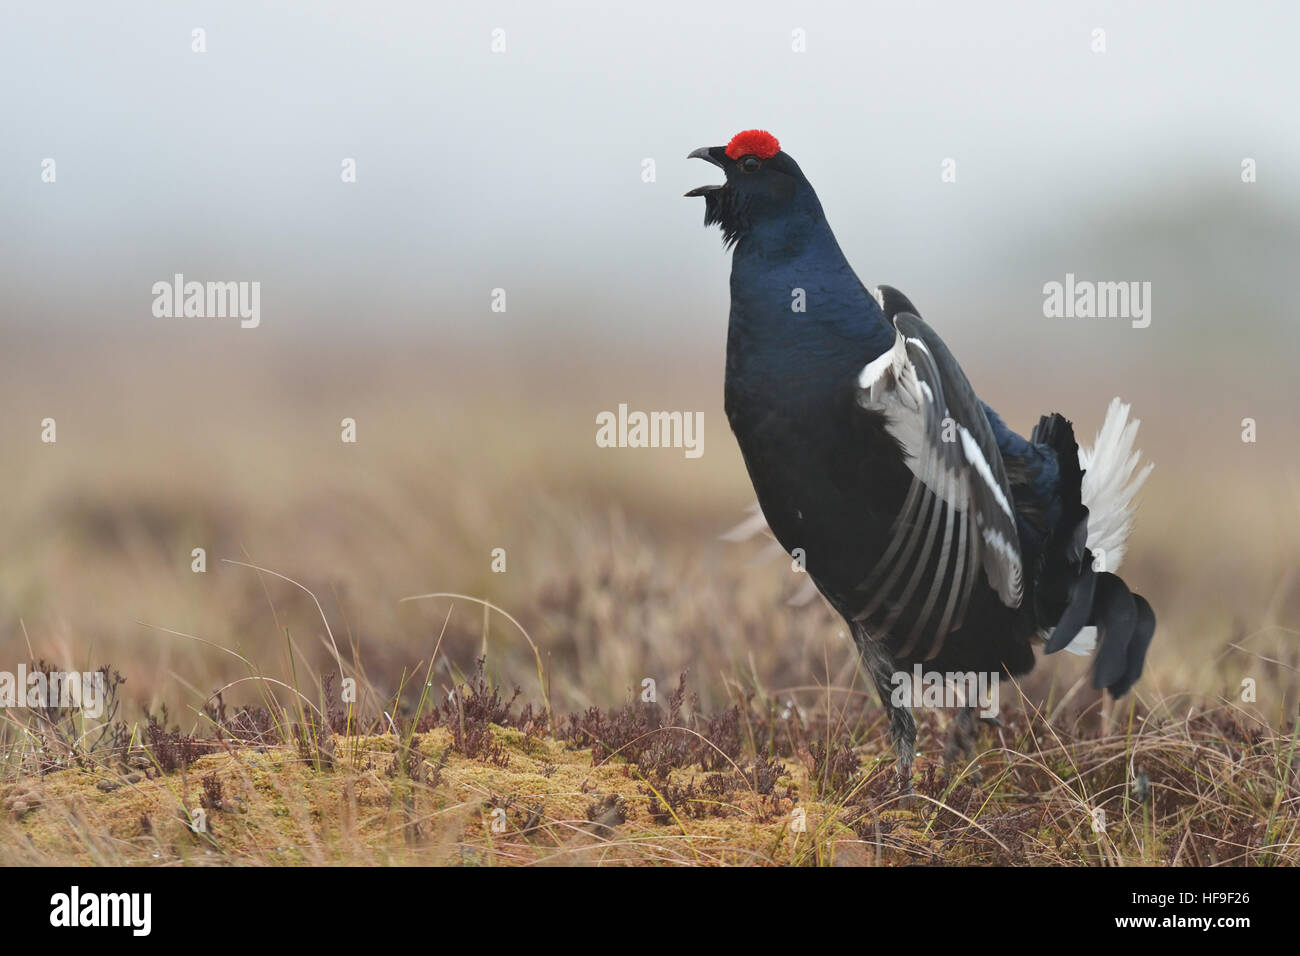 Black Grouse (Tetrao tetrix) calling in the mist. Black grouse jumping. Black Grouse in the bog. Misty morning. Forest. Spring. Stock Photo